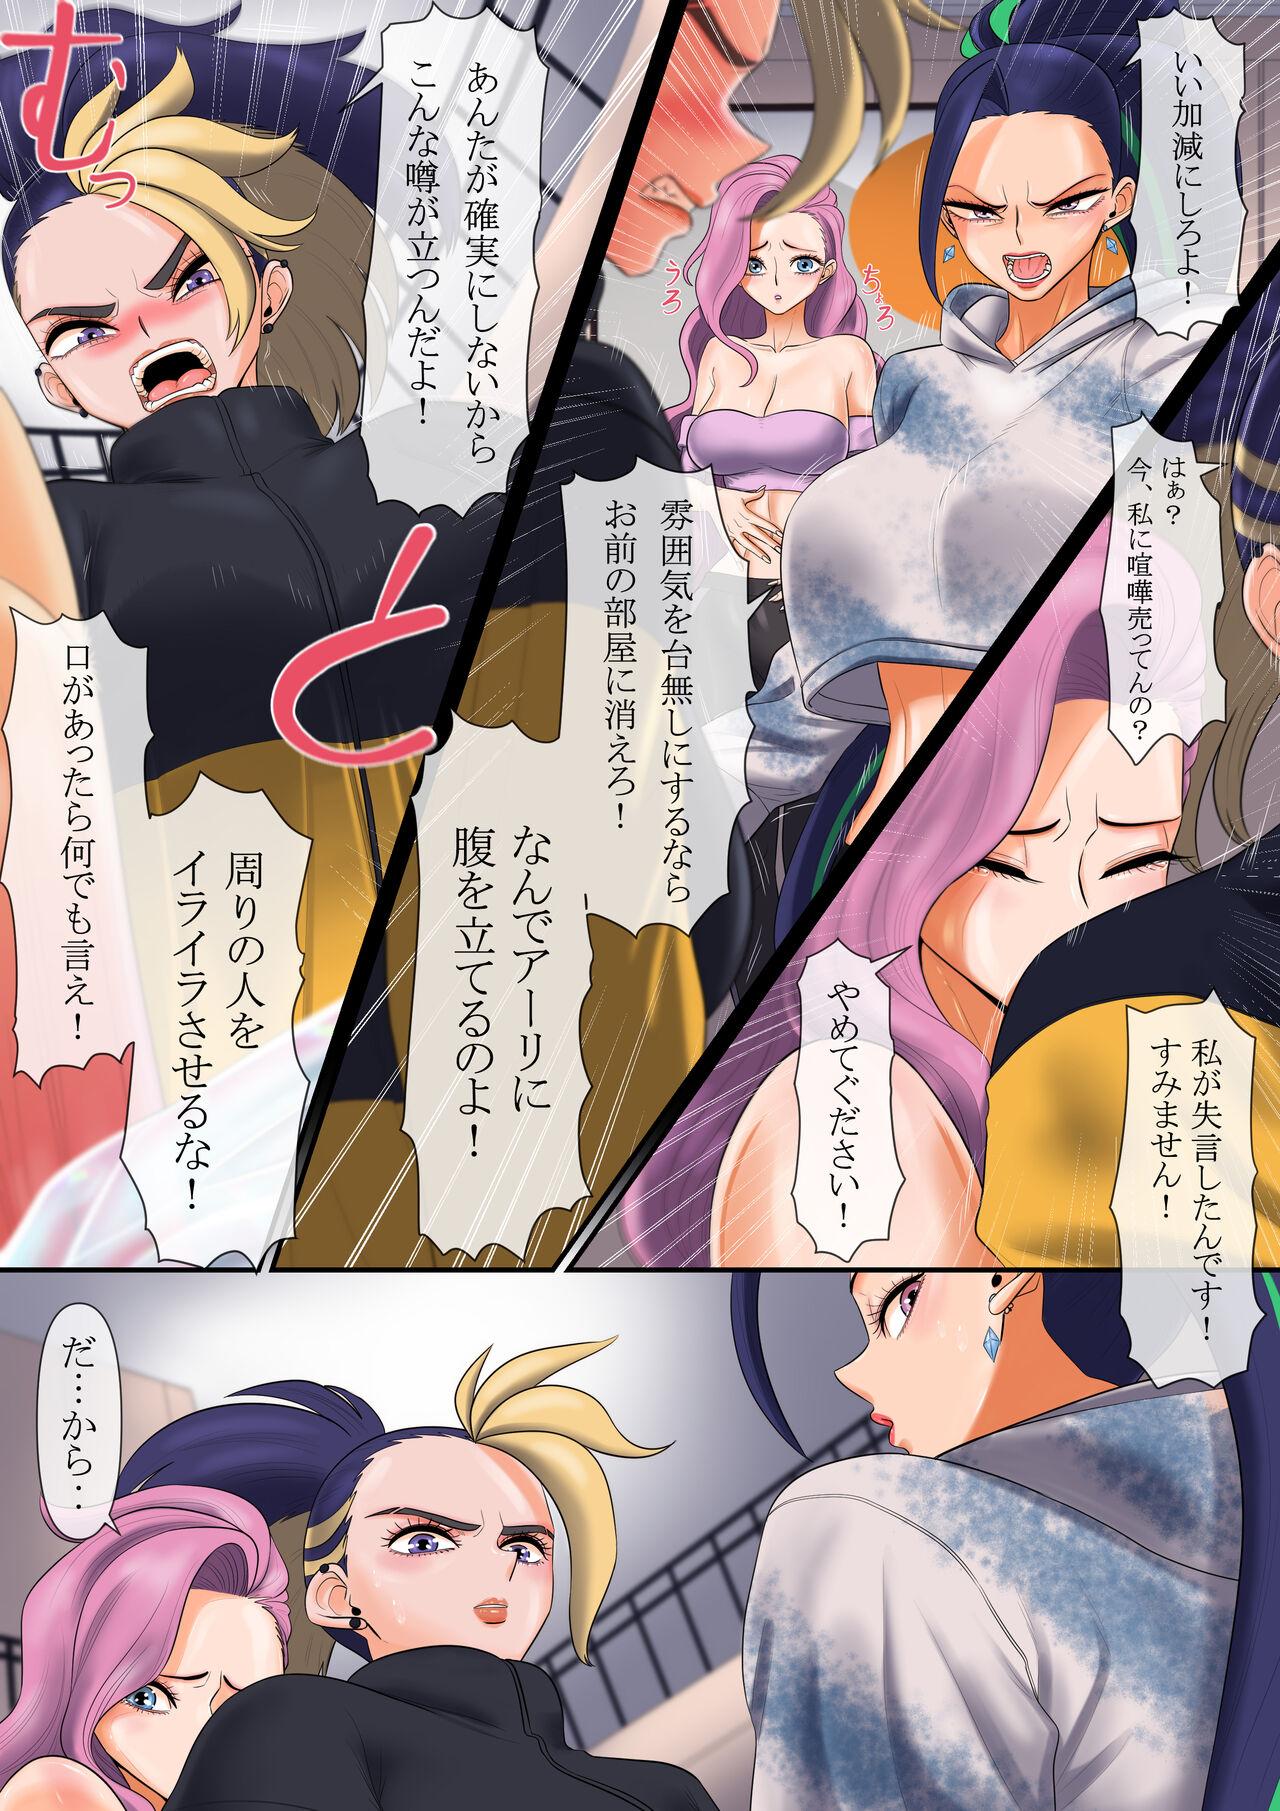 Horny 守りたいもの... - League of legends Family - Page 5